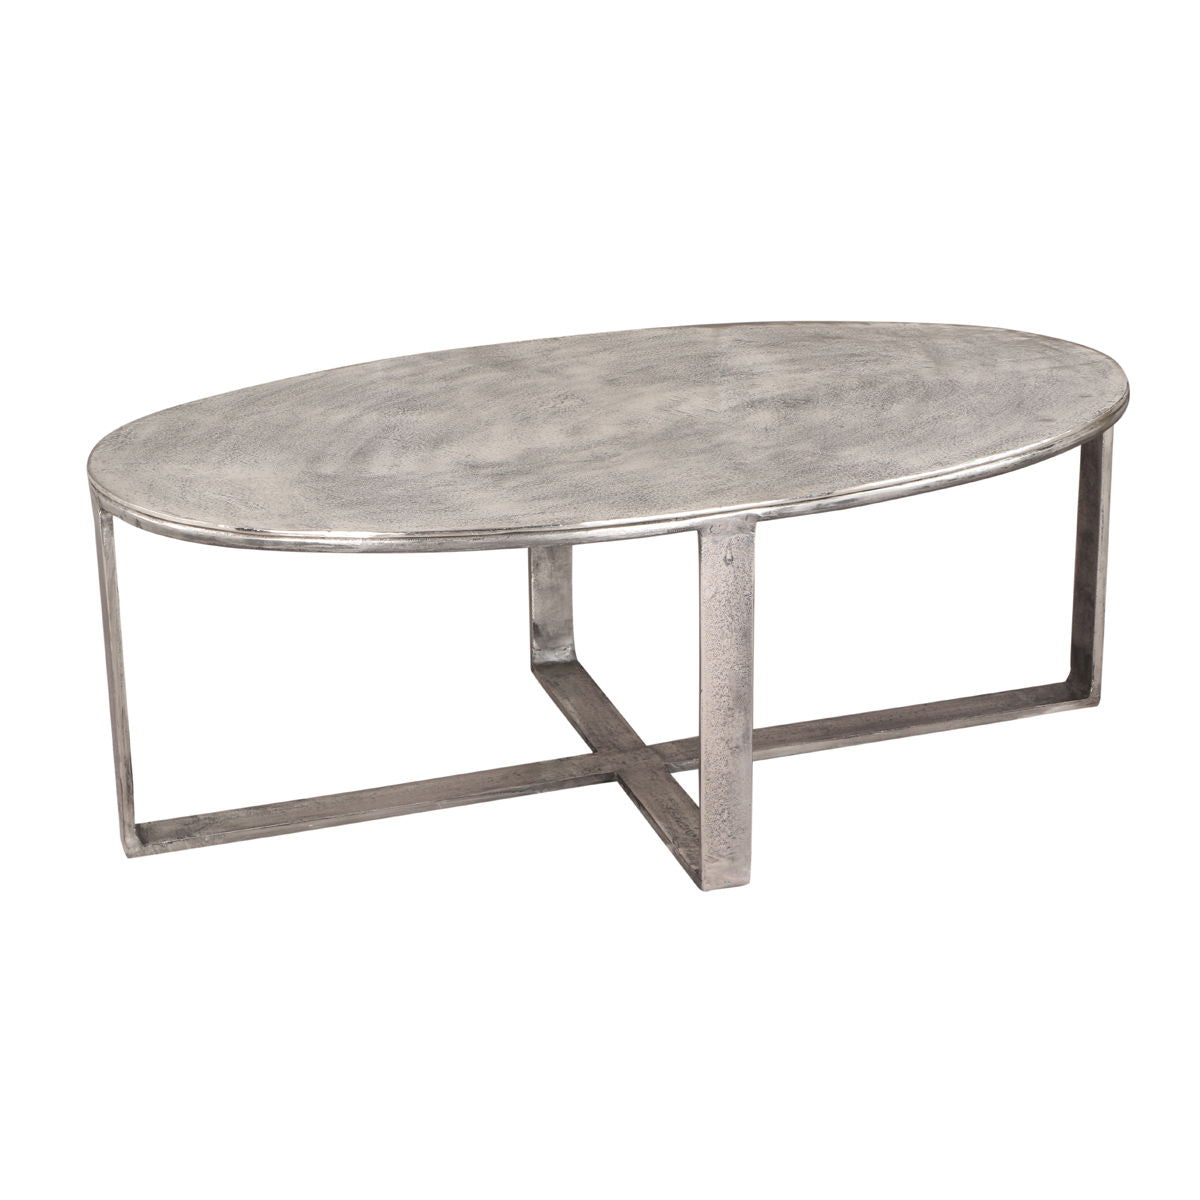 Flores - Oval Coffee Table - Nickel Antique